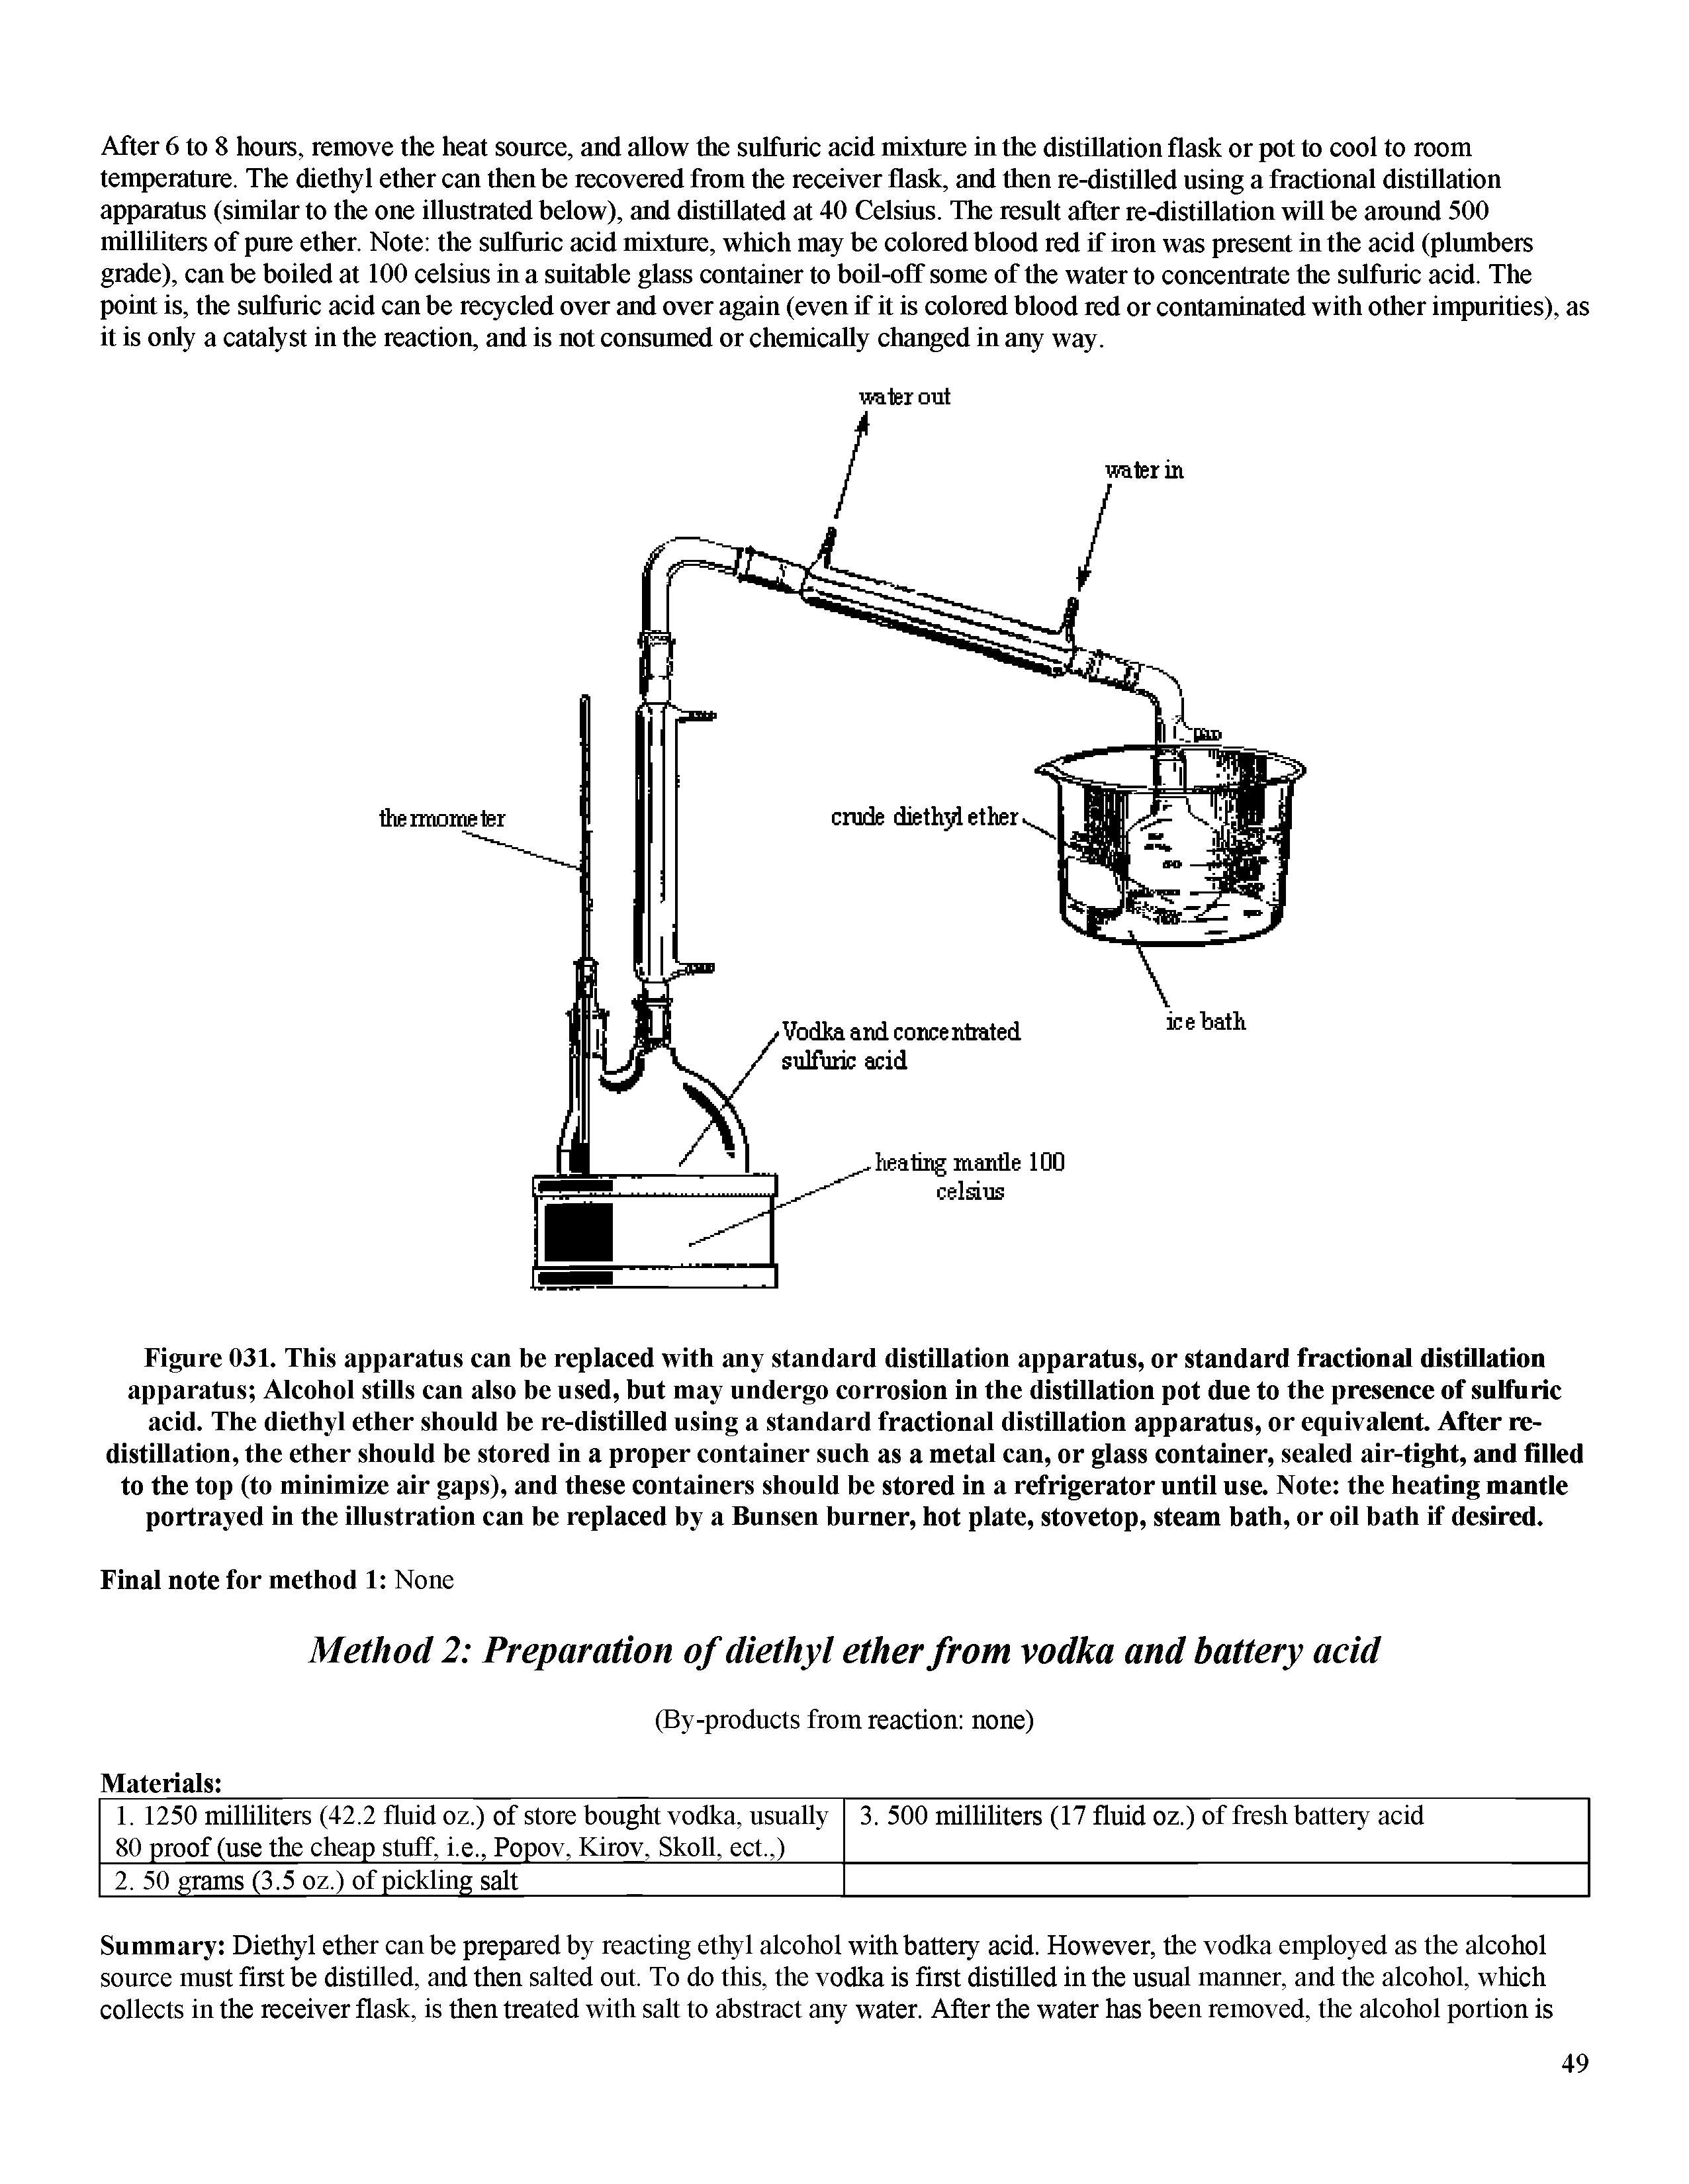 Figure 031. This apparatus can be replaced with any standard distillation apparatus, or standard fractional distillation apparatus Alcohol stills can also be used, but may undergo corrosion in the distillation pot due to the presence of sulfuric acid. The diethyl ether should be re-distilled using a standard fractional distillation apparatus, or equivalent. After redistillation, the ether should be stored in a proper container such as a metal can, or glass container, sealed air-tight, and filled to the top (to minimize air gaps), and these containers should be stored in a refrigerator until use. Note the heating mantle portrayed in the illustration can be replaced by a Bunsen burner, hot plate, stovetop, steam bath, or oil bath if desired.